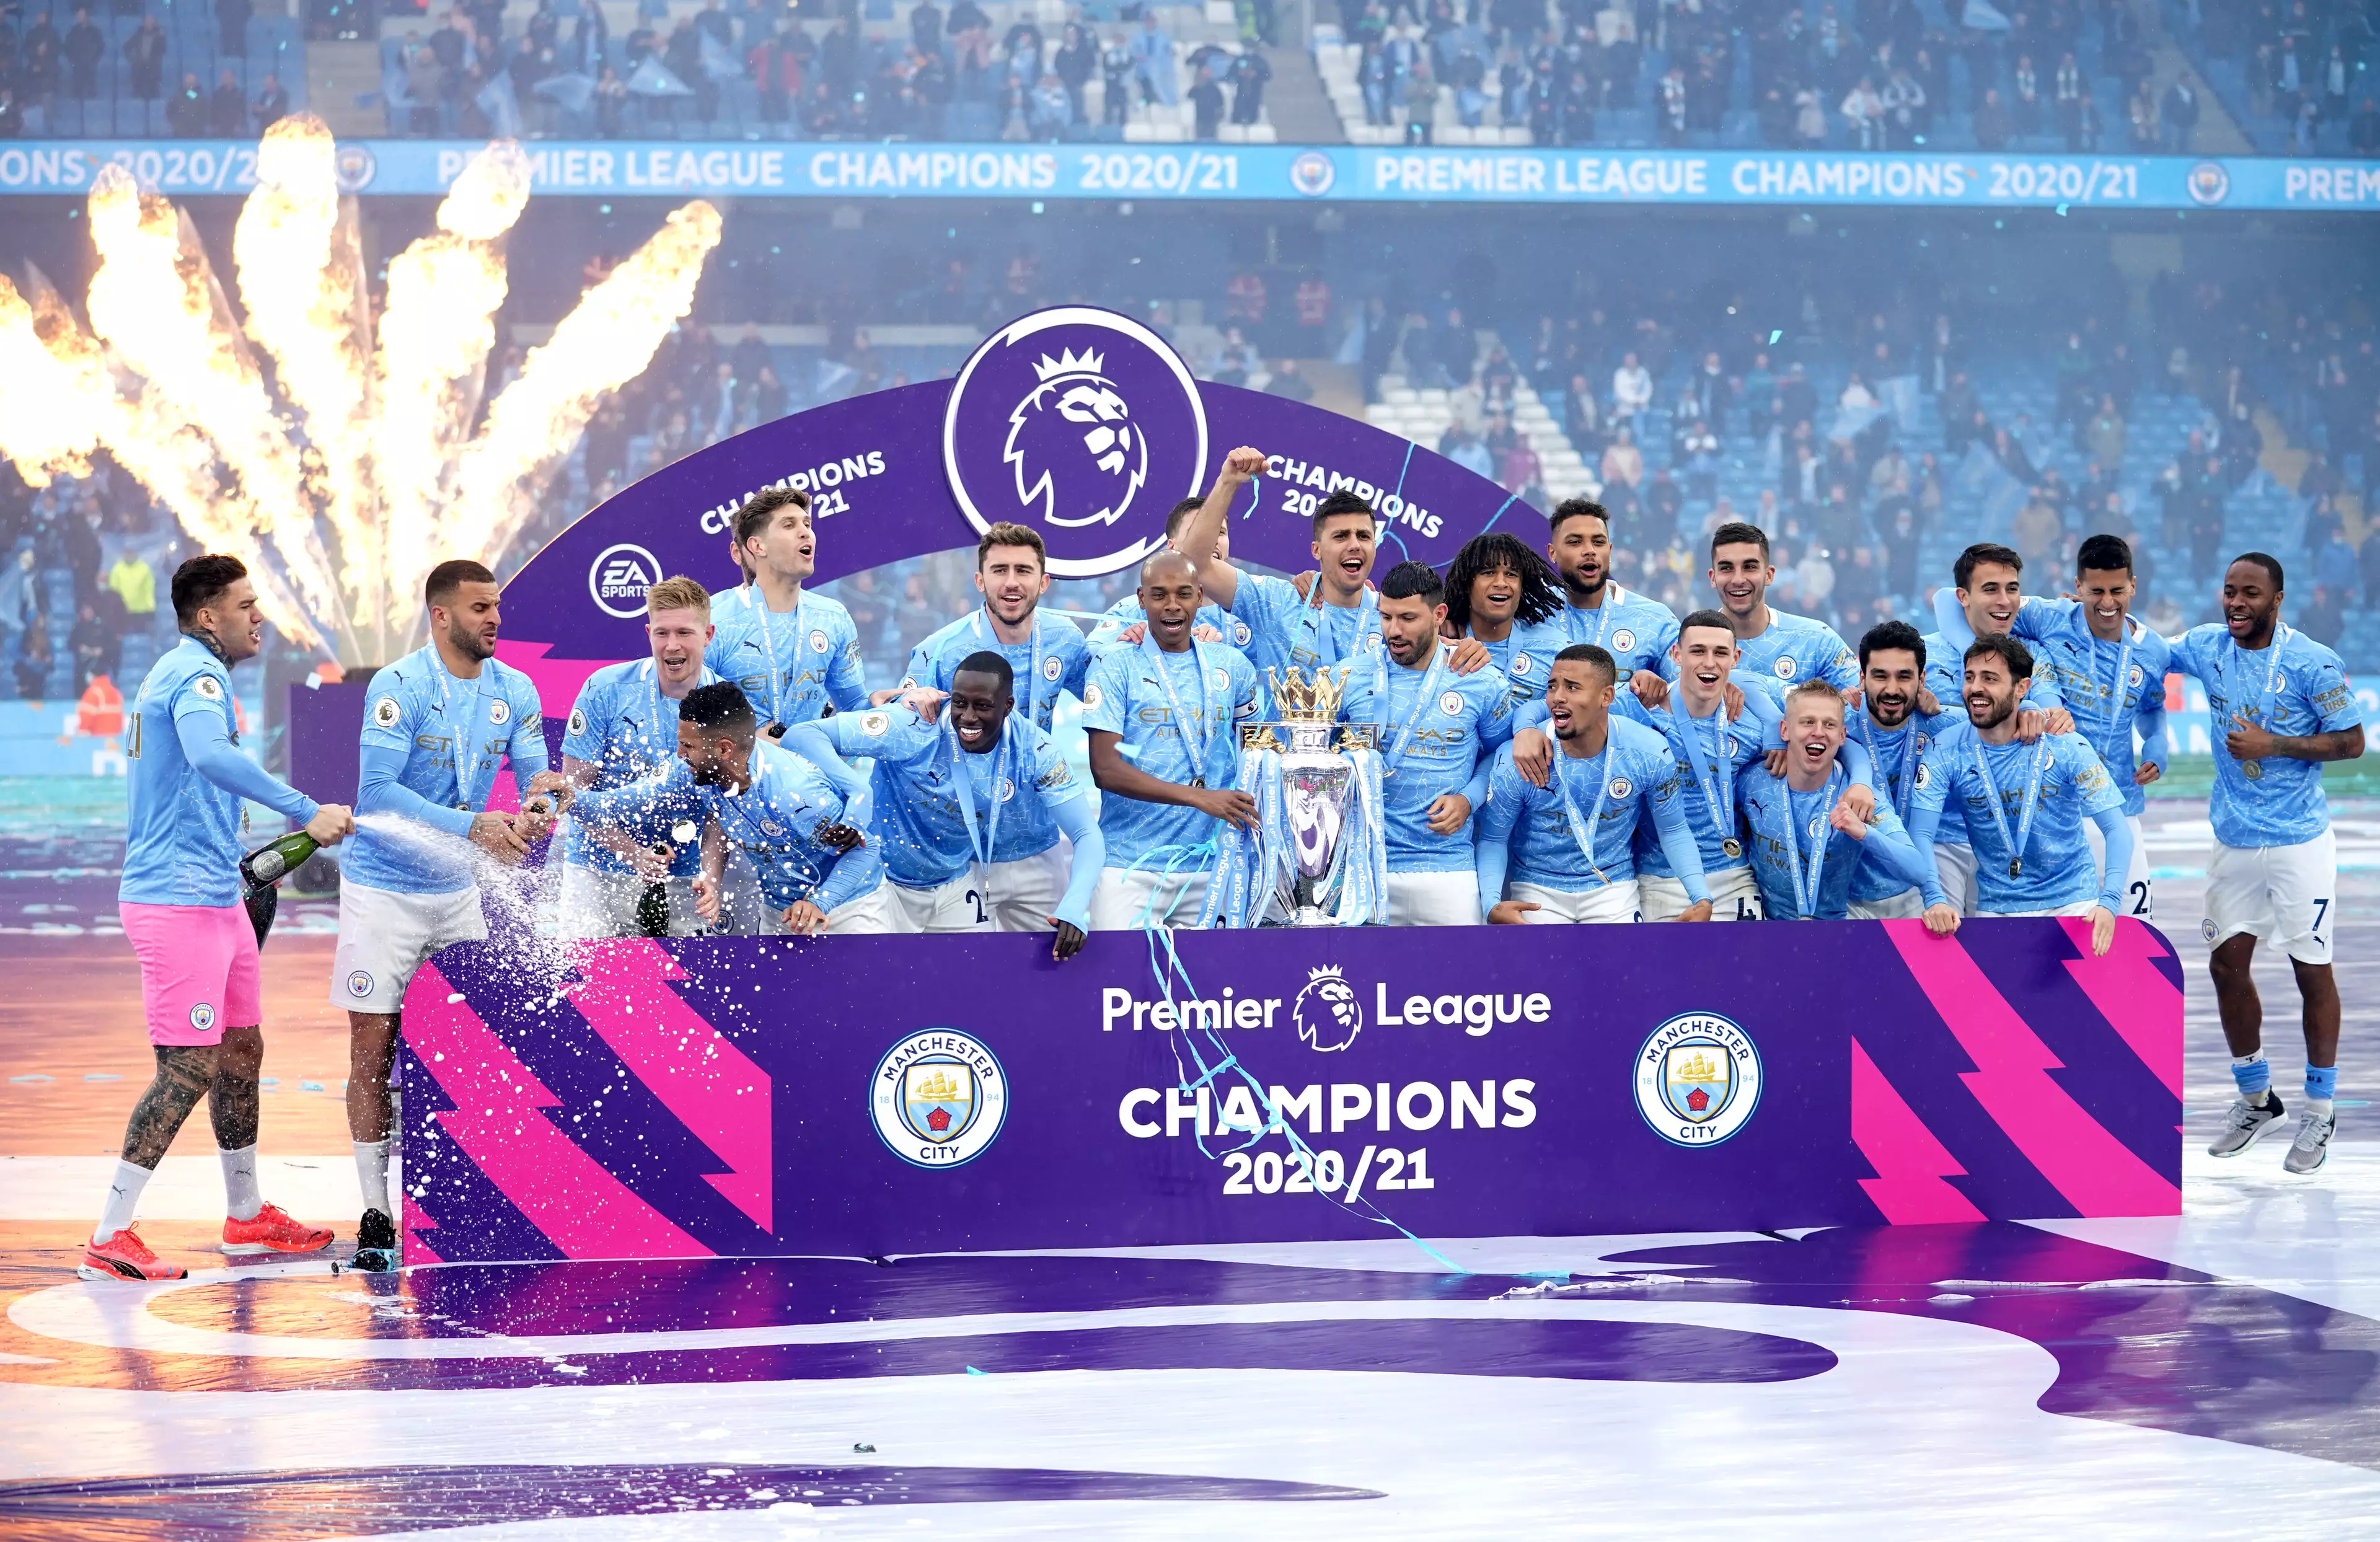 City will apparently repeat these scenes in May 2022. Image: PA Images